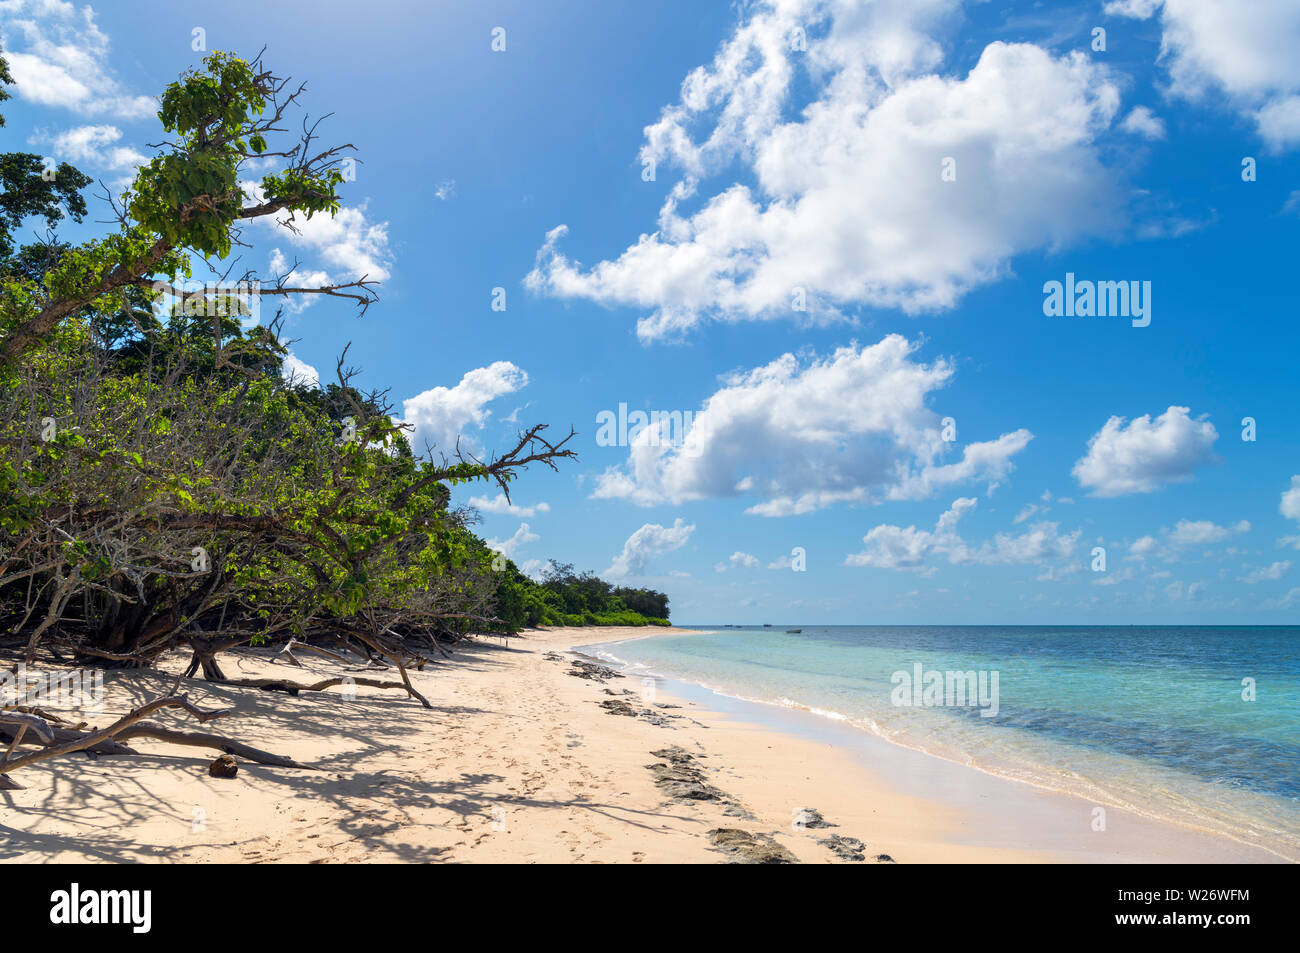 Beach on Green Island, a coral cay in the Great Barrier Reef Marine Park, Queensland, Australia Stock Photo